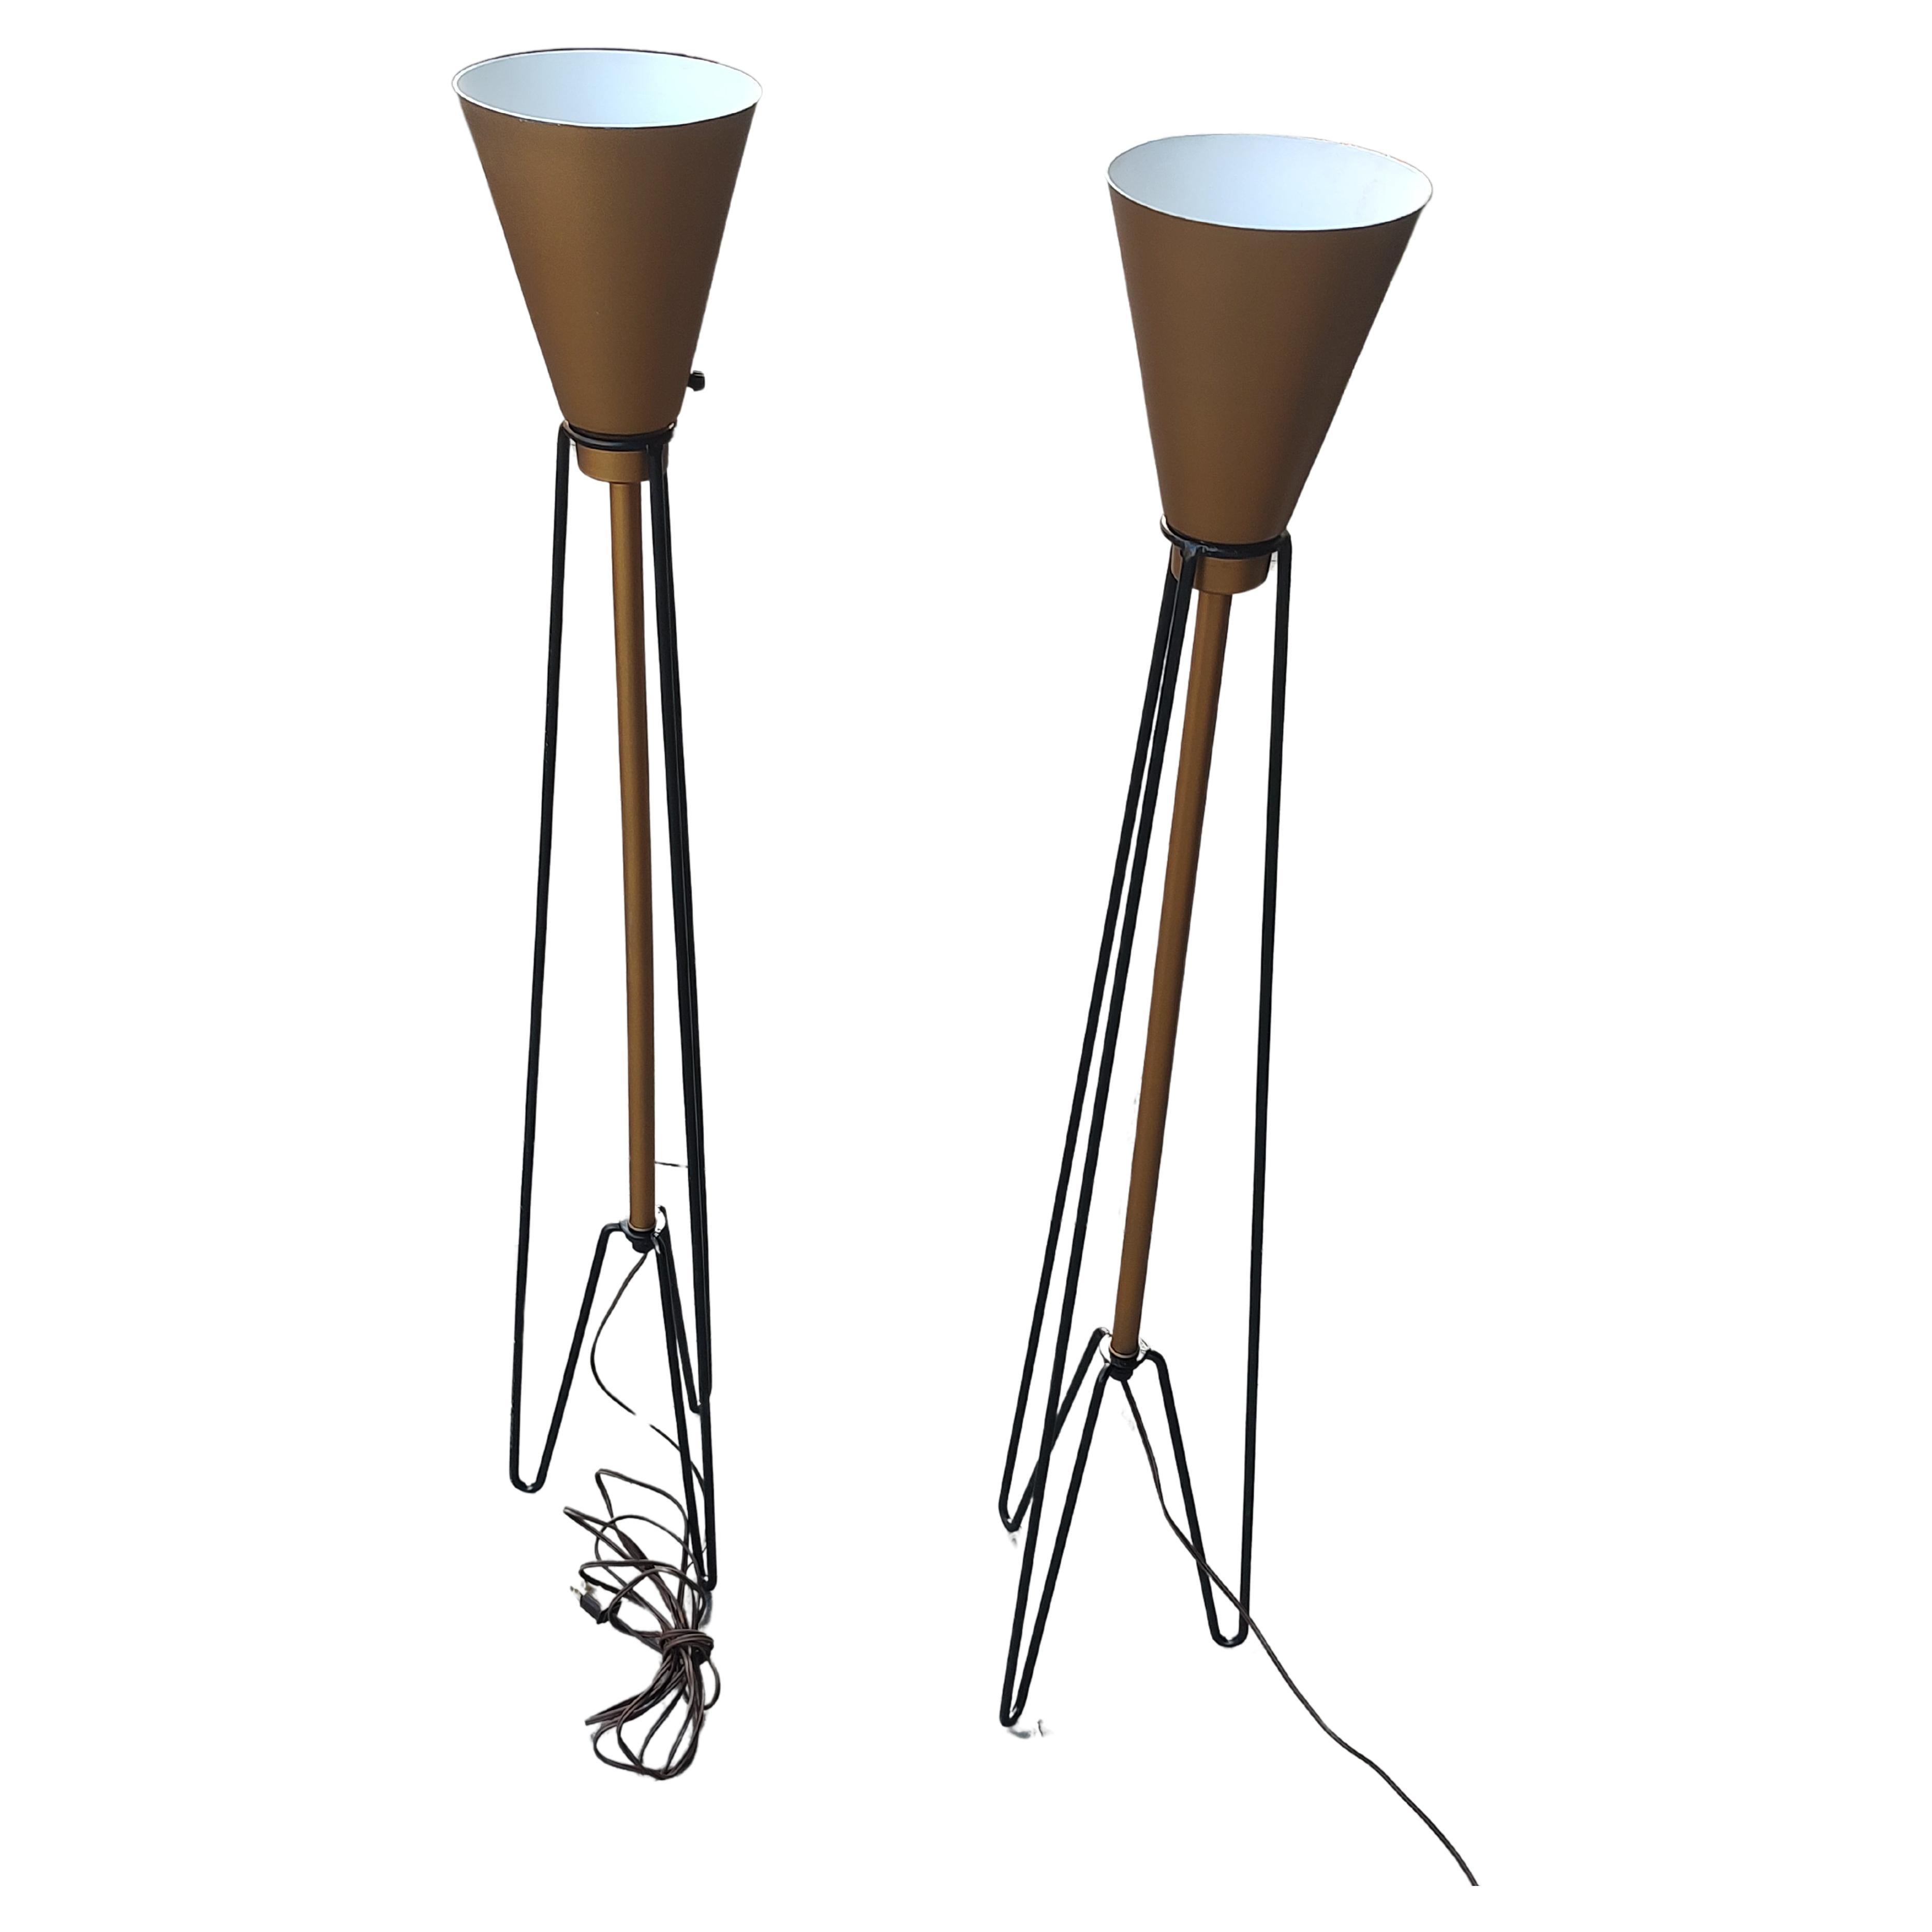 Mid-20th Century Pair of Mid Century Modern C1950s Floor Lamps Atomic Towers by Majestic Lamp Co. For Sale